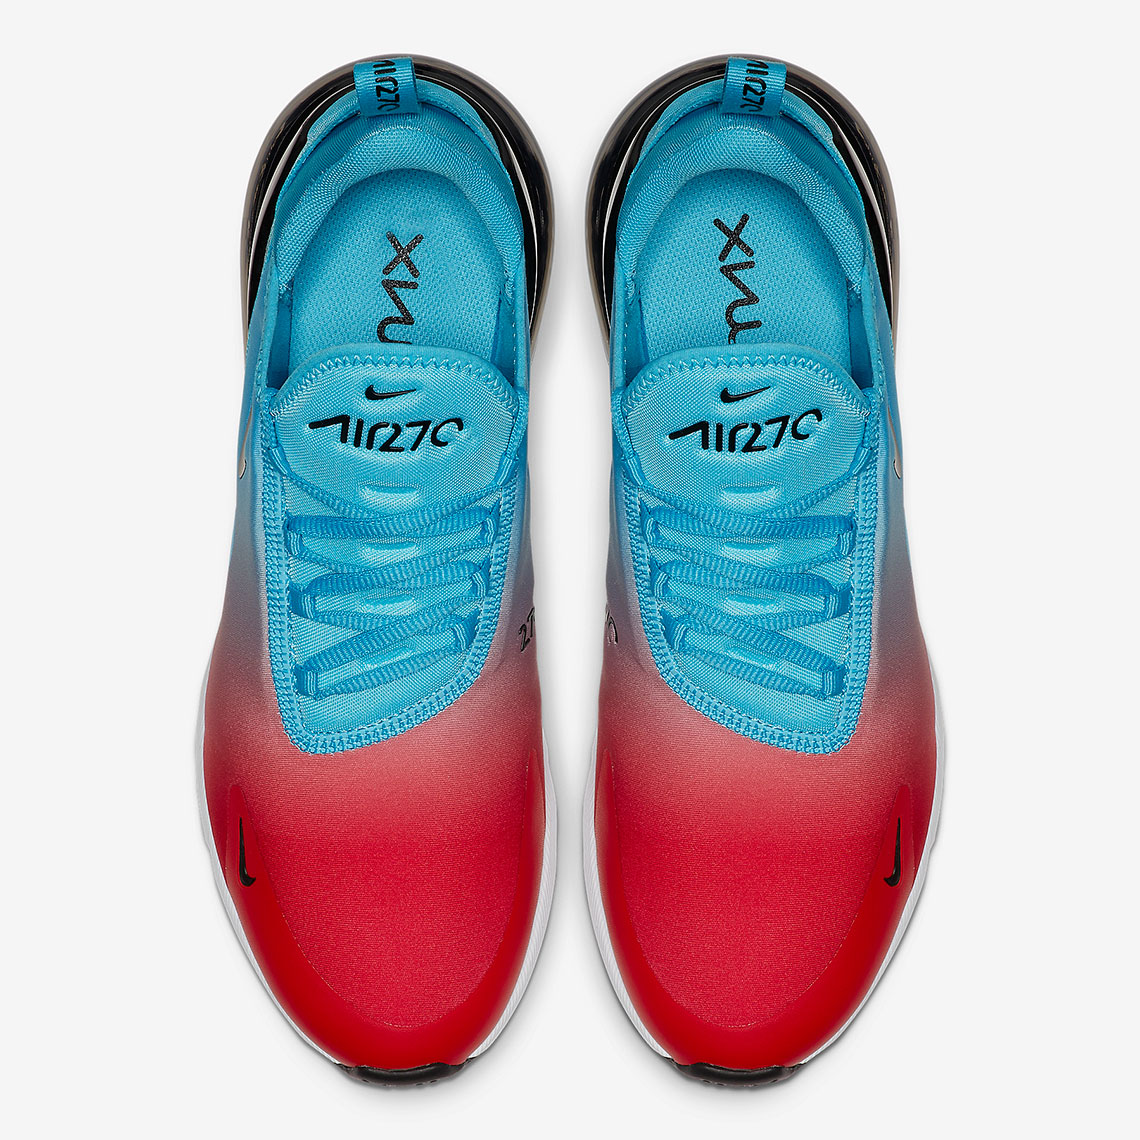 nike 270 blue and red